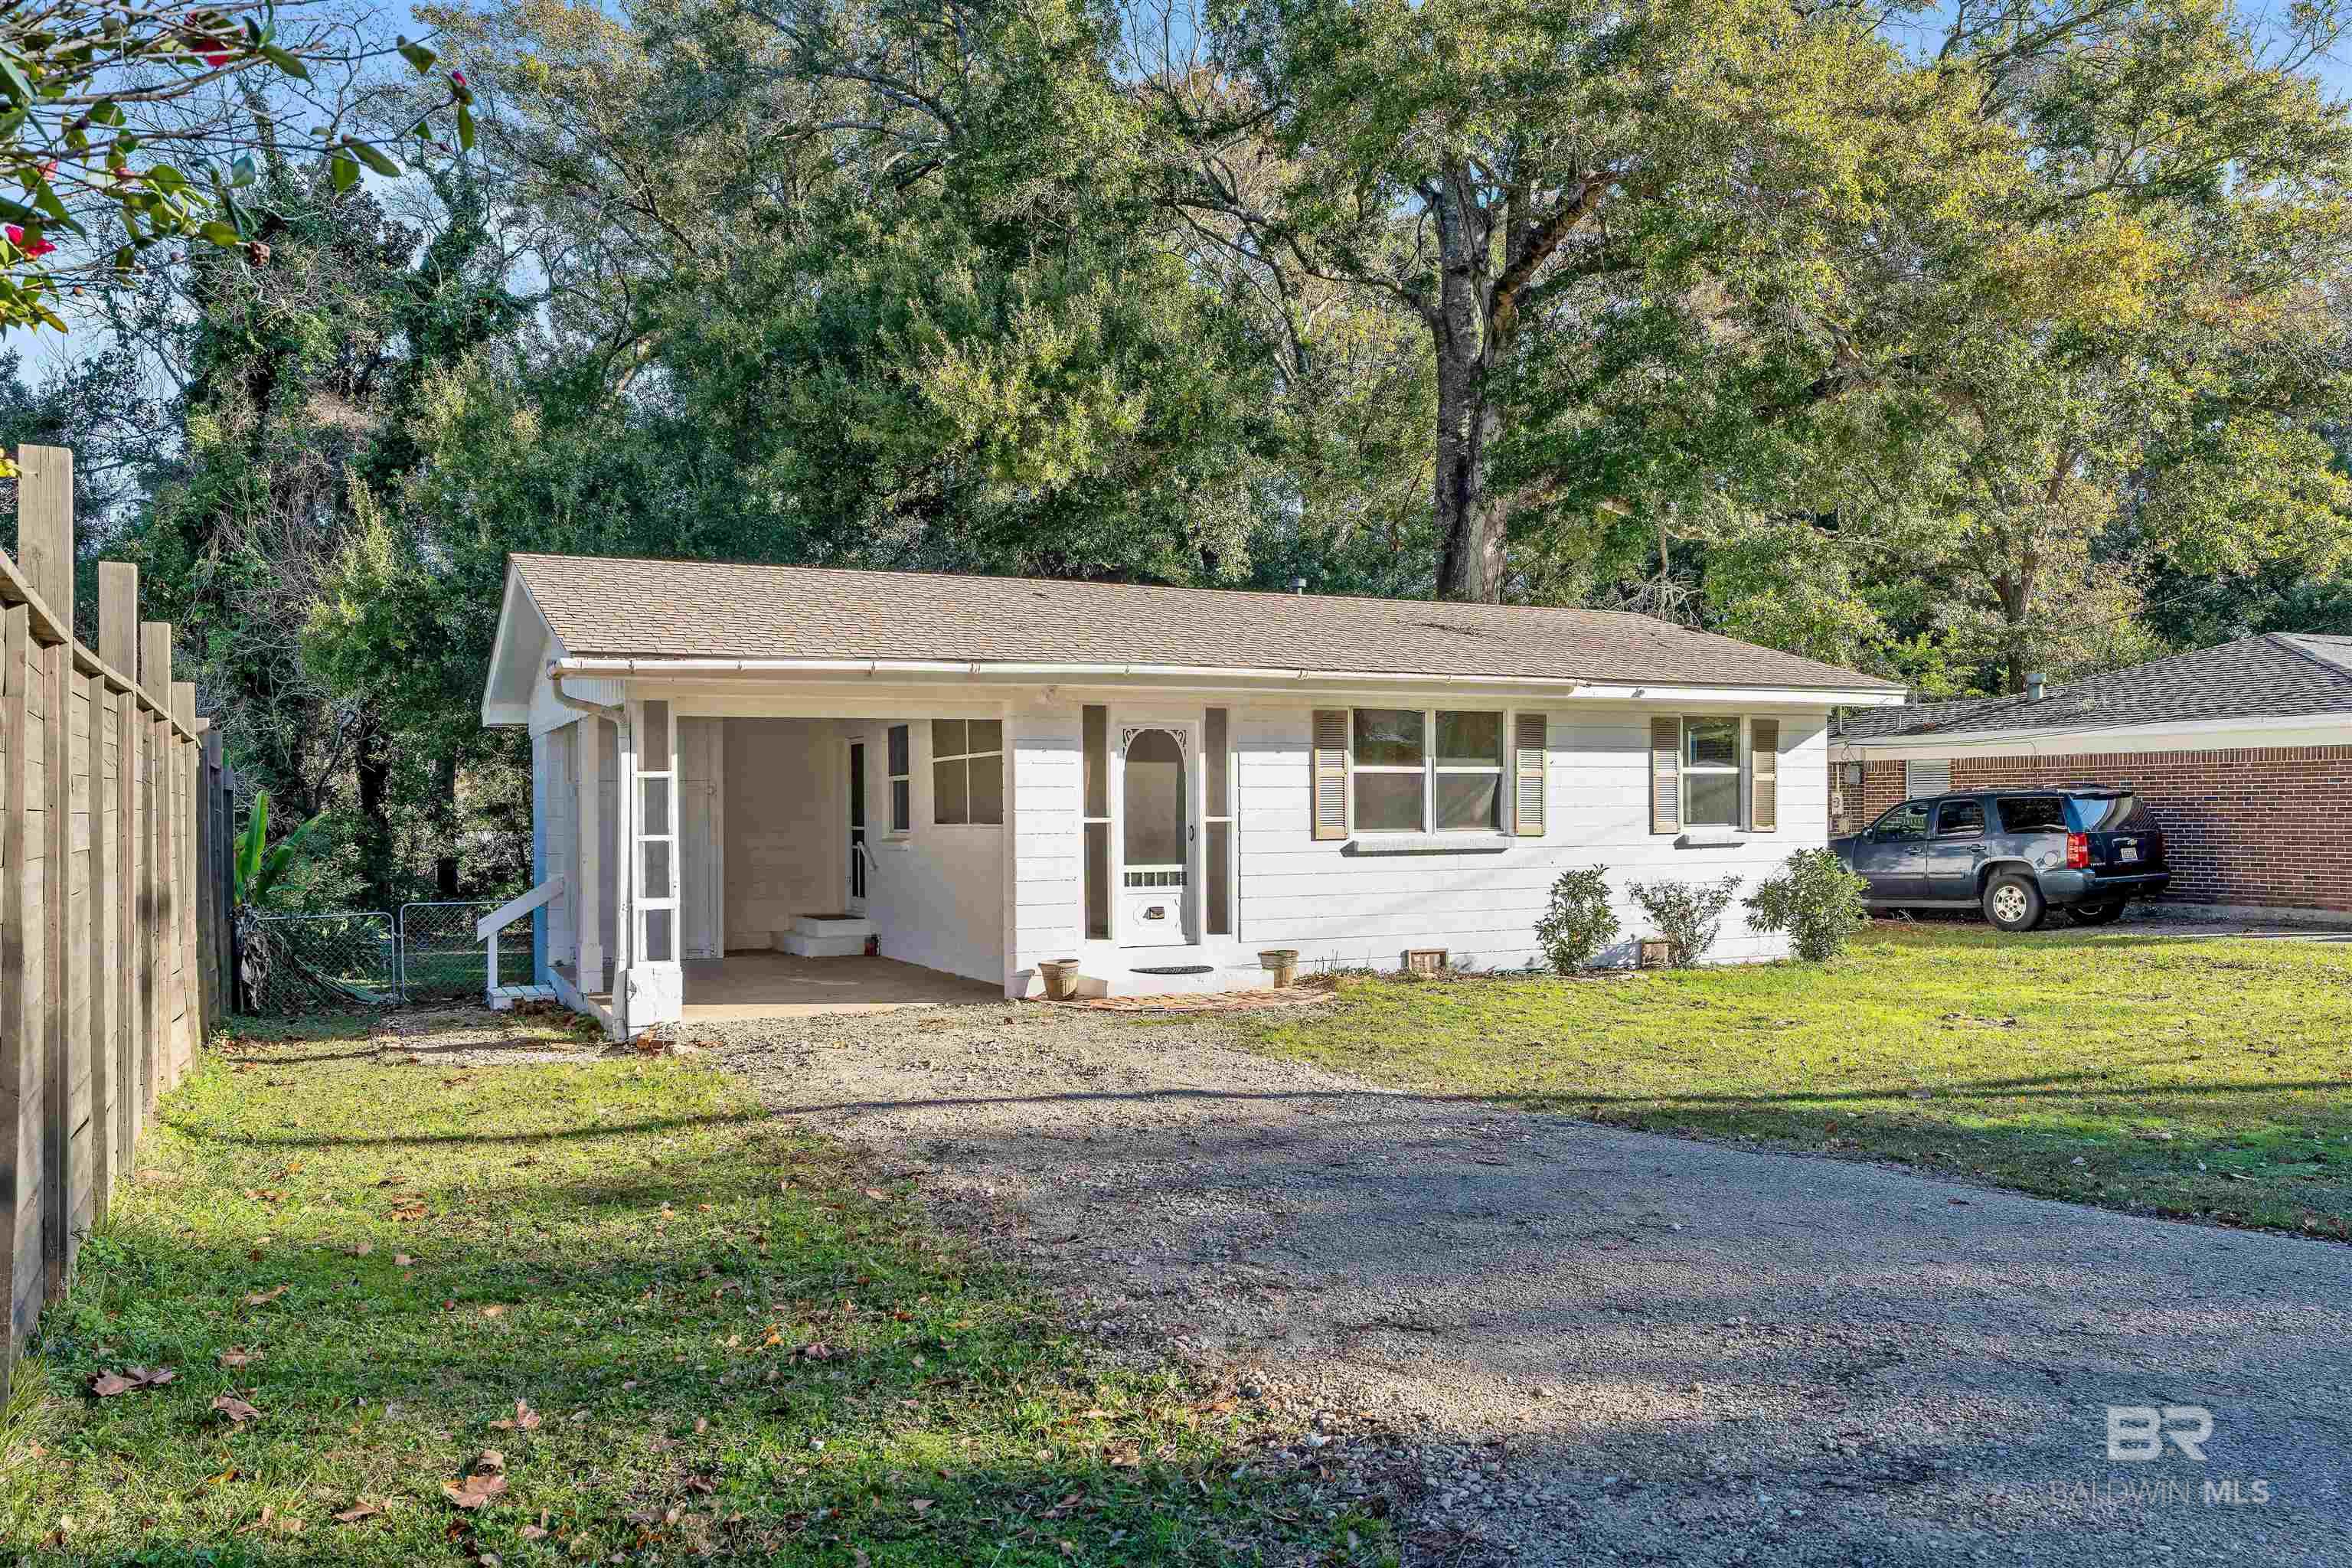 This CHARMING FAIRHOPE COTTAGE just 2 minutes from the center of downtown has been remodeled with new kitchen cabinets, quartz countertops, new microwave and dishwasher, flooring, interior paint, lighting, and electrical.  Home features 2BR/1BA with an attached single carport on a large lot with a huge, fenced backyard.  This is a great investment property, or for first time buyers or second home buyers to enjoy all the Eastern Shore has to offer. All Information provided is deemed reliable but not guaranteed. Buyer or buyer’s agent to verify all information.